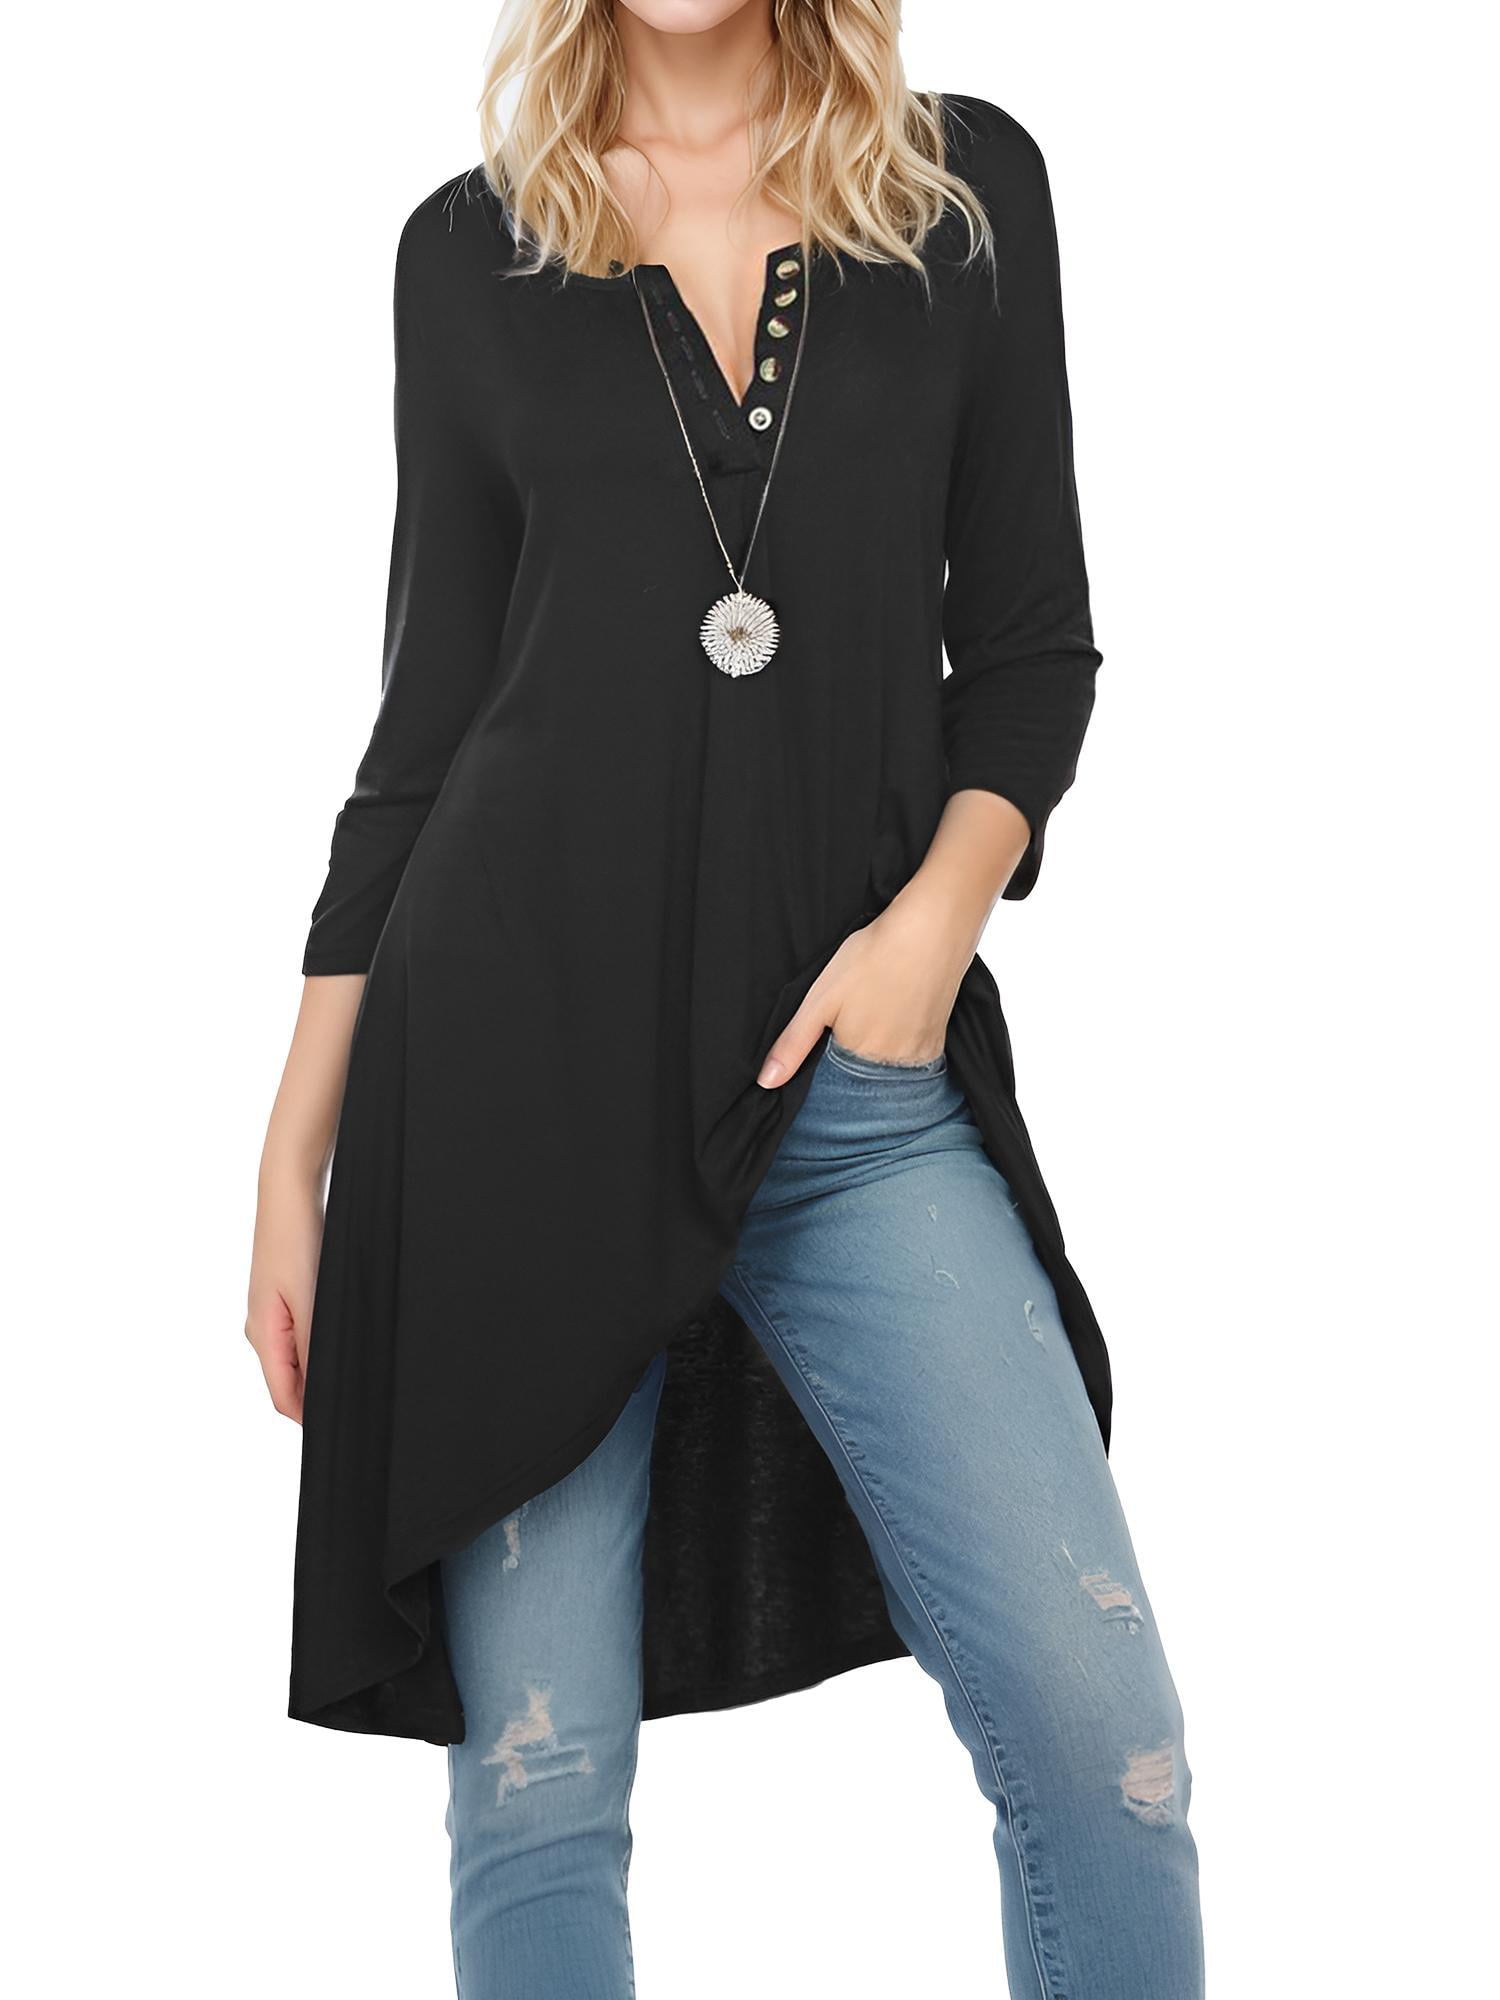 Womens Tie Tunic Shirts Winter Casual Dressy T-Shirt Long Sleeve Loose Tops  Blouse For Women – the best products in the Joom Geek online store